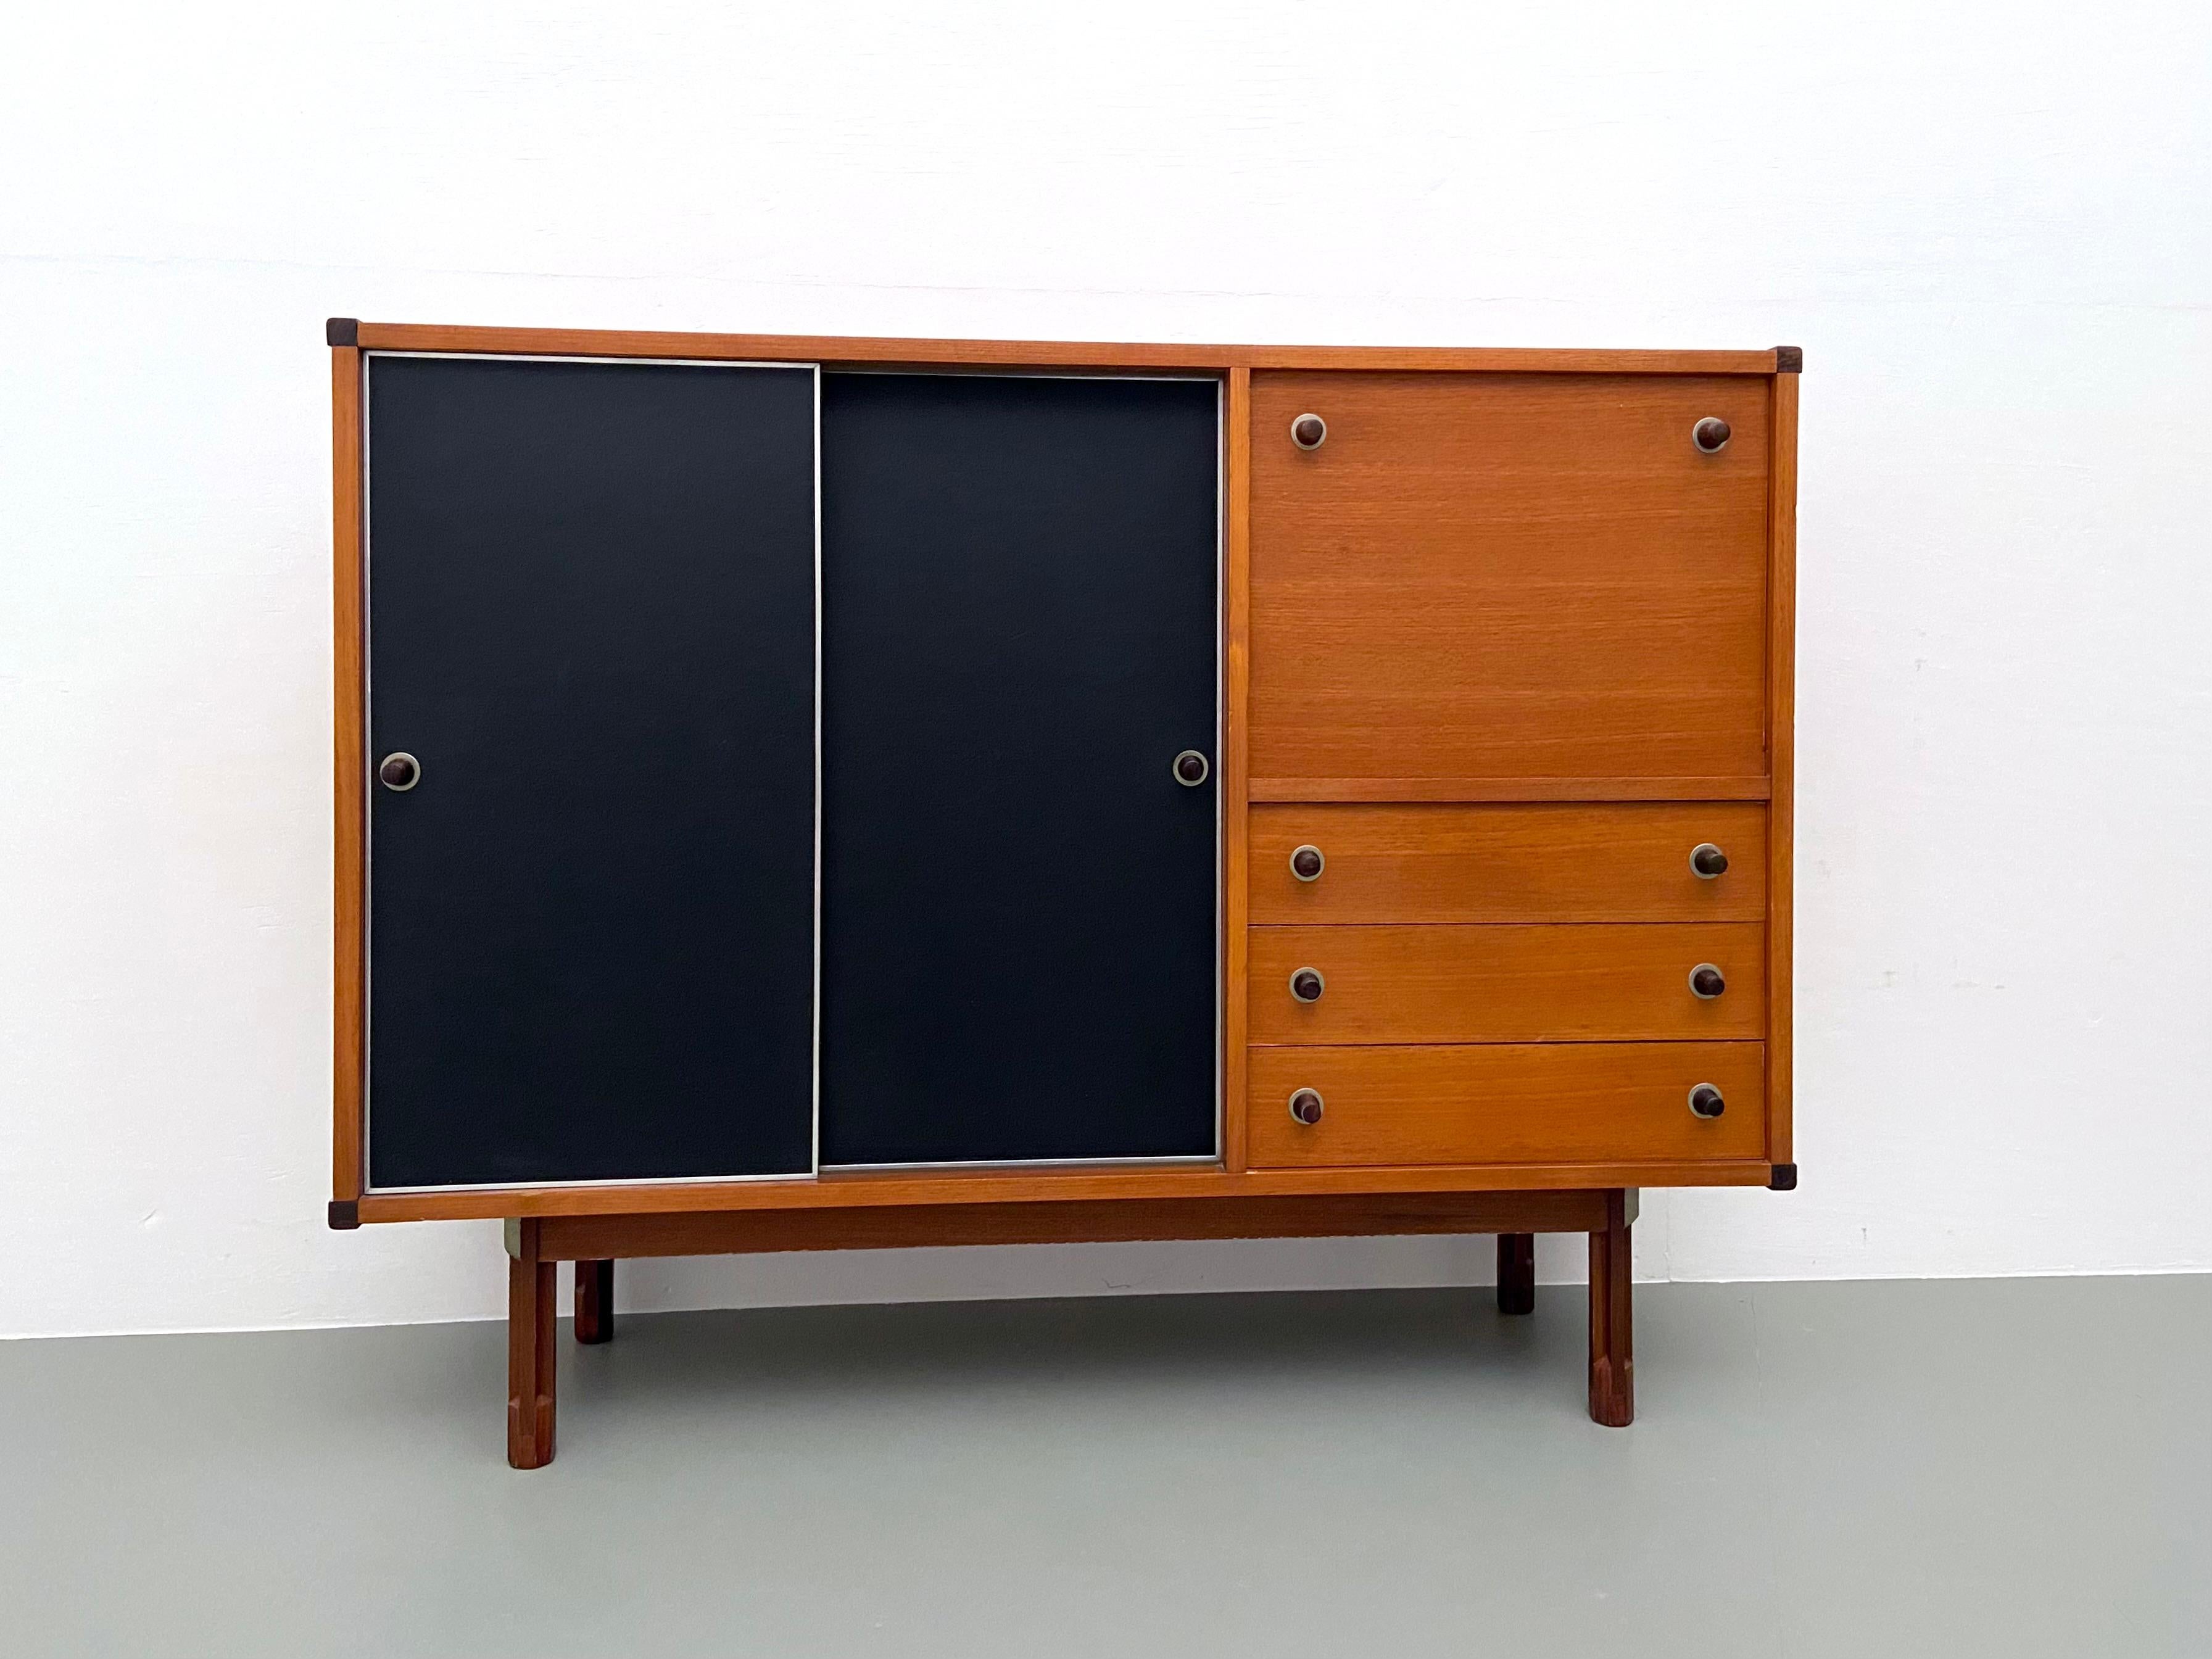 Mid-Century Modern High Credenza by Pierro Ranzani for Elam in Laminate, Teak and Metal, 1962 For Sale